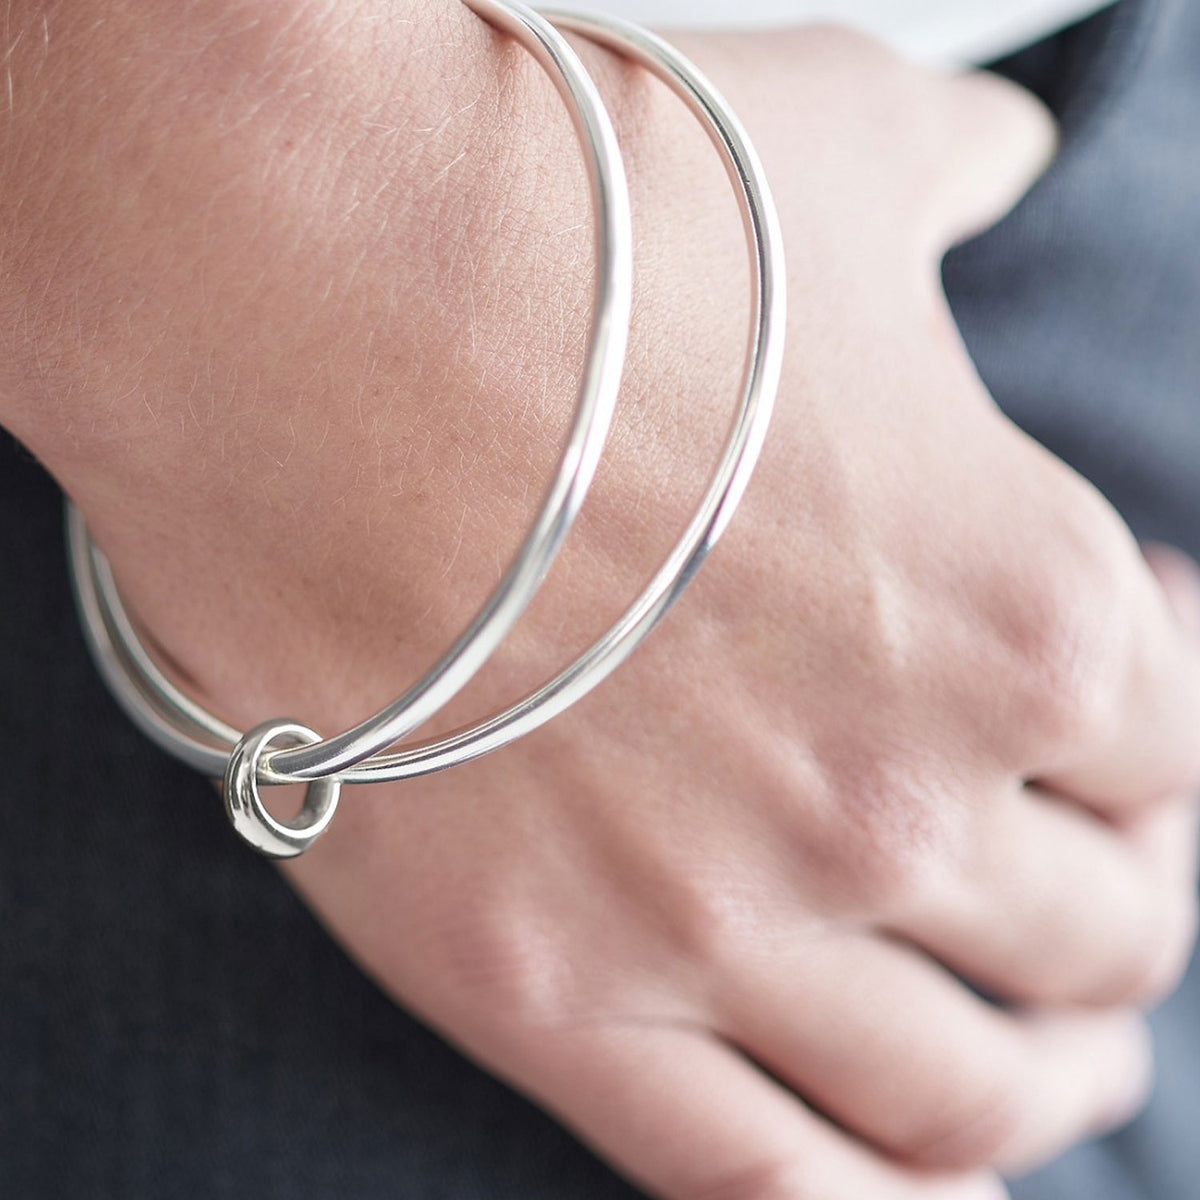 Two solid silver bangles joined in eternity by an asymmetrical Eclipse loop - a gorgeous designer made bangle for women.